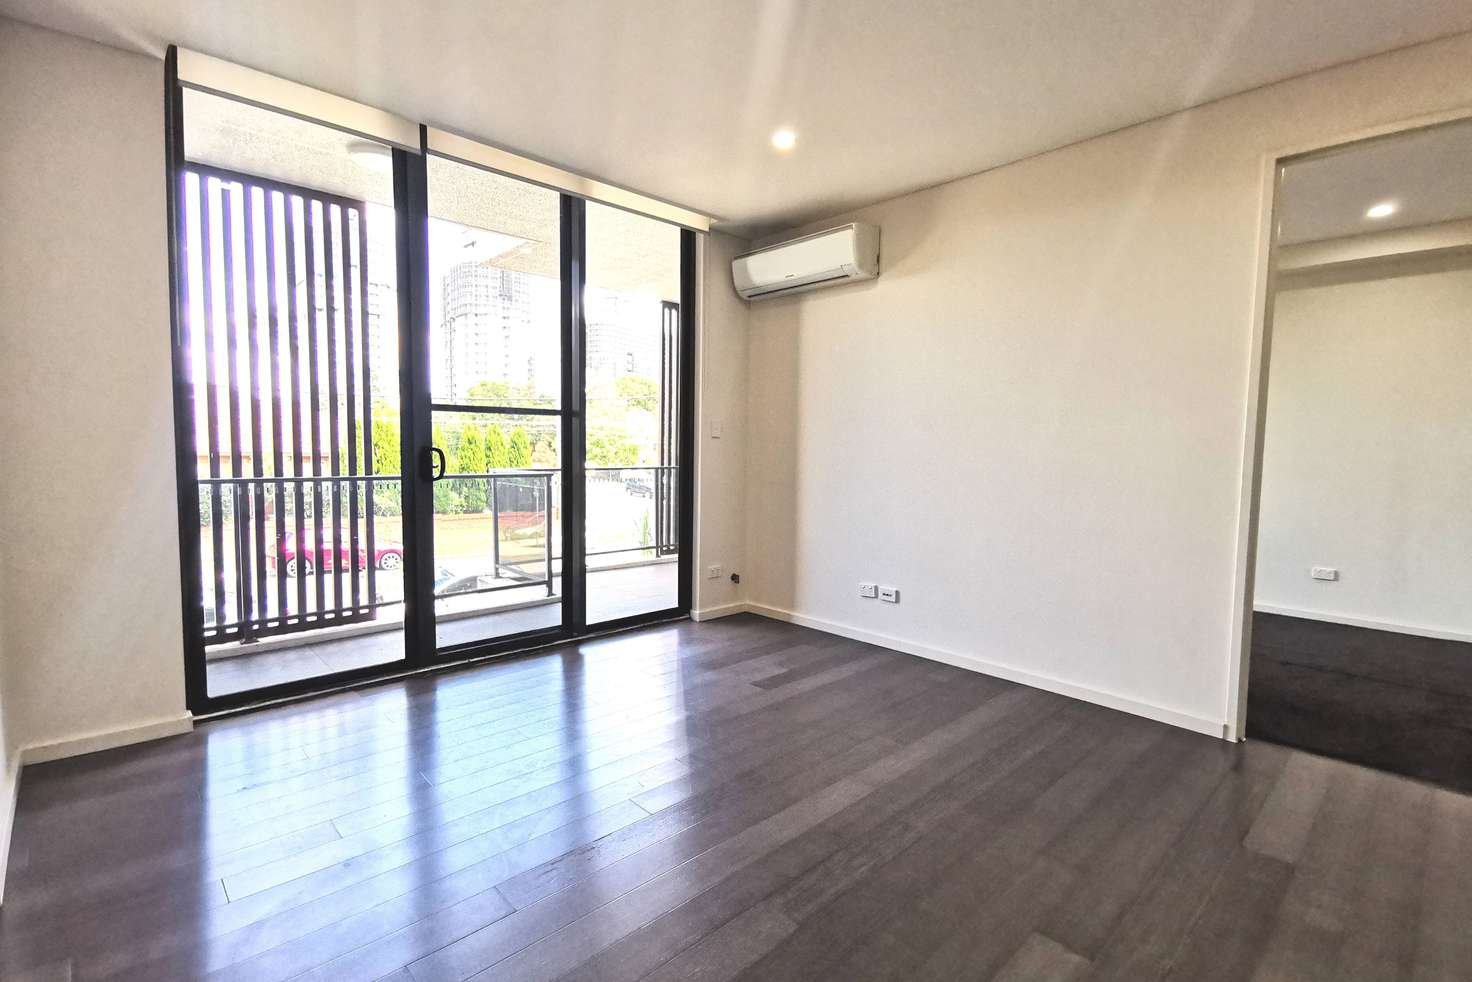 Main view of Homely apartment listing, 302 20 Epping Road, Epping NSW 2121